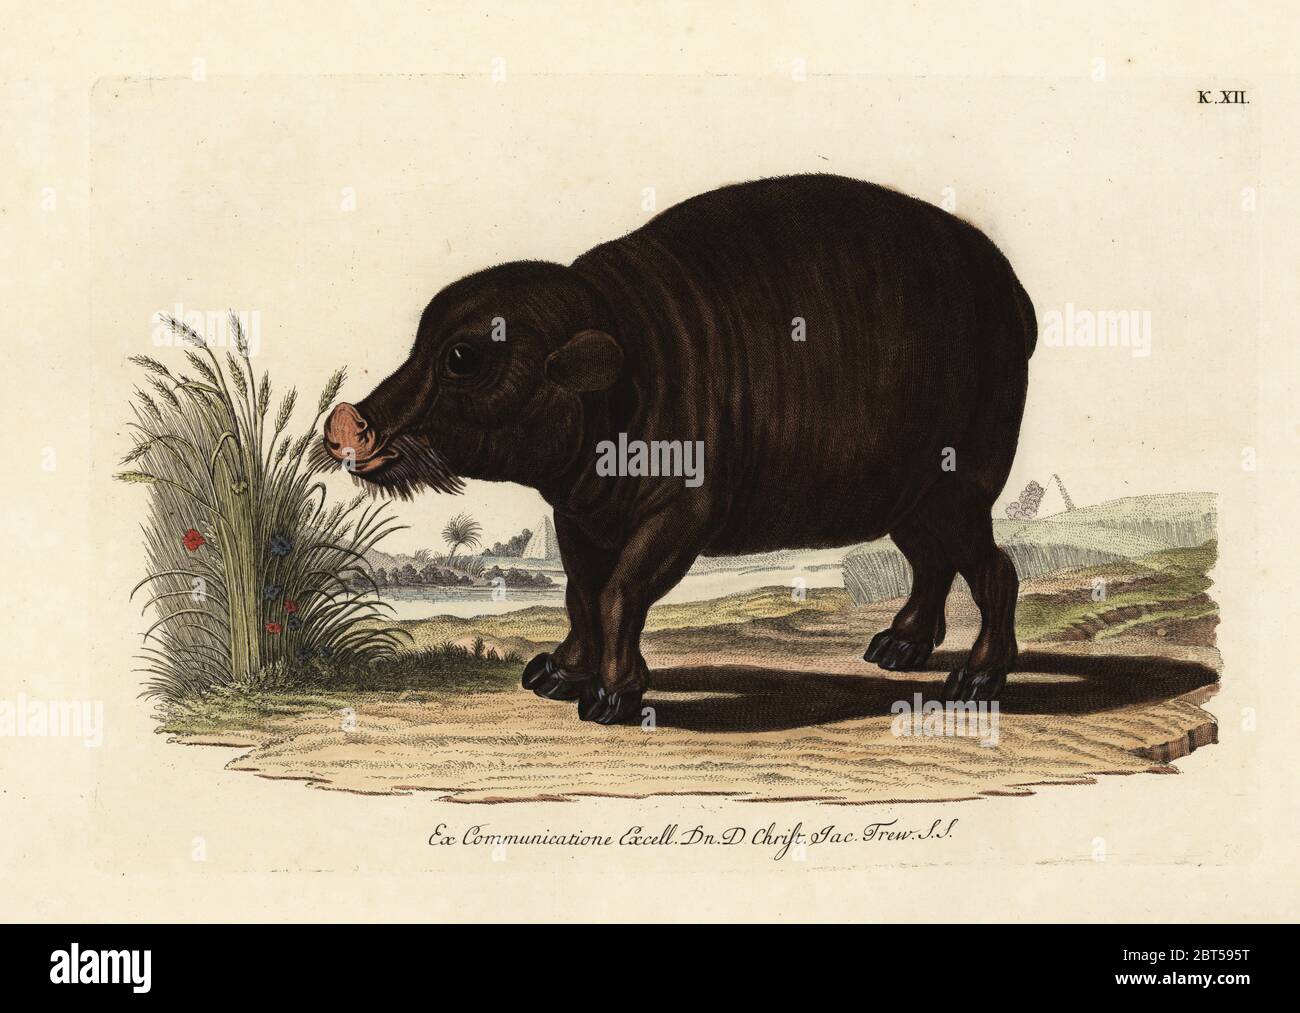 Nile hippopotamus, Hippopotamus amphibius. Vulnerable. L'Hippopotame amphibie du Nil. Handcoloured copperplate engraving from Georg Wolfgang Knorr's Deliciae Naturae Selectae of Kabinet van Zeldzaamheden der Natuur, Blusse and Son, Nuremberg, 1771. Specimens from a Wunderkammer or Cabinet of Curiosities owned by Dr. Christoph Jacob Trew in Nuremberg. Stock Photo